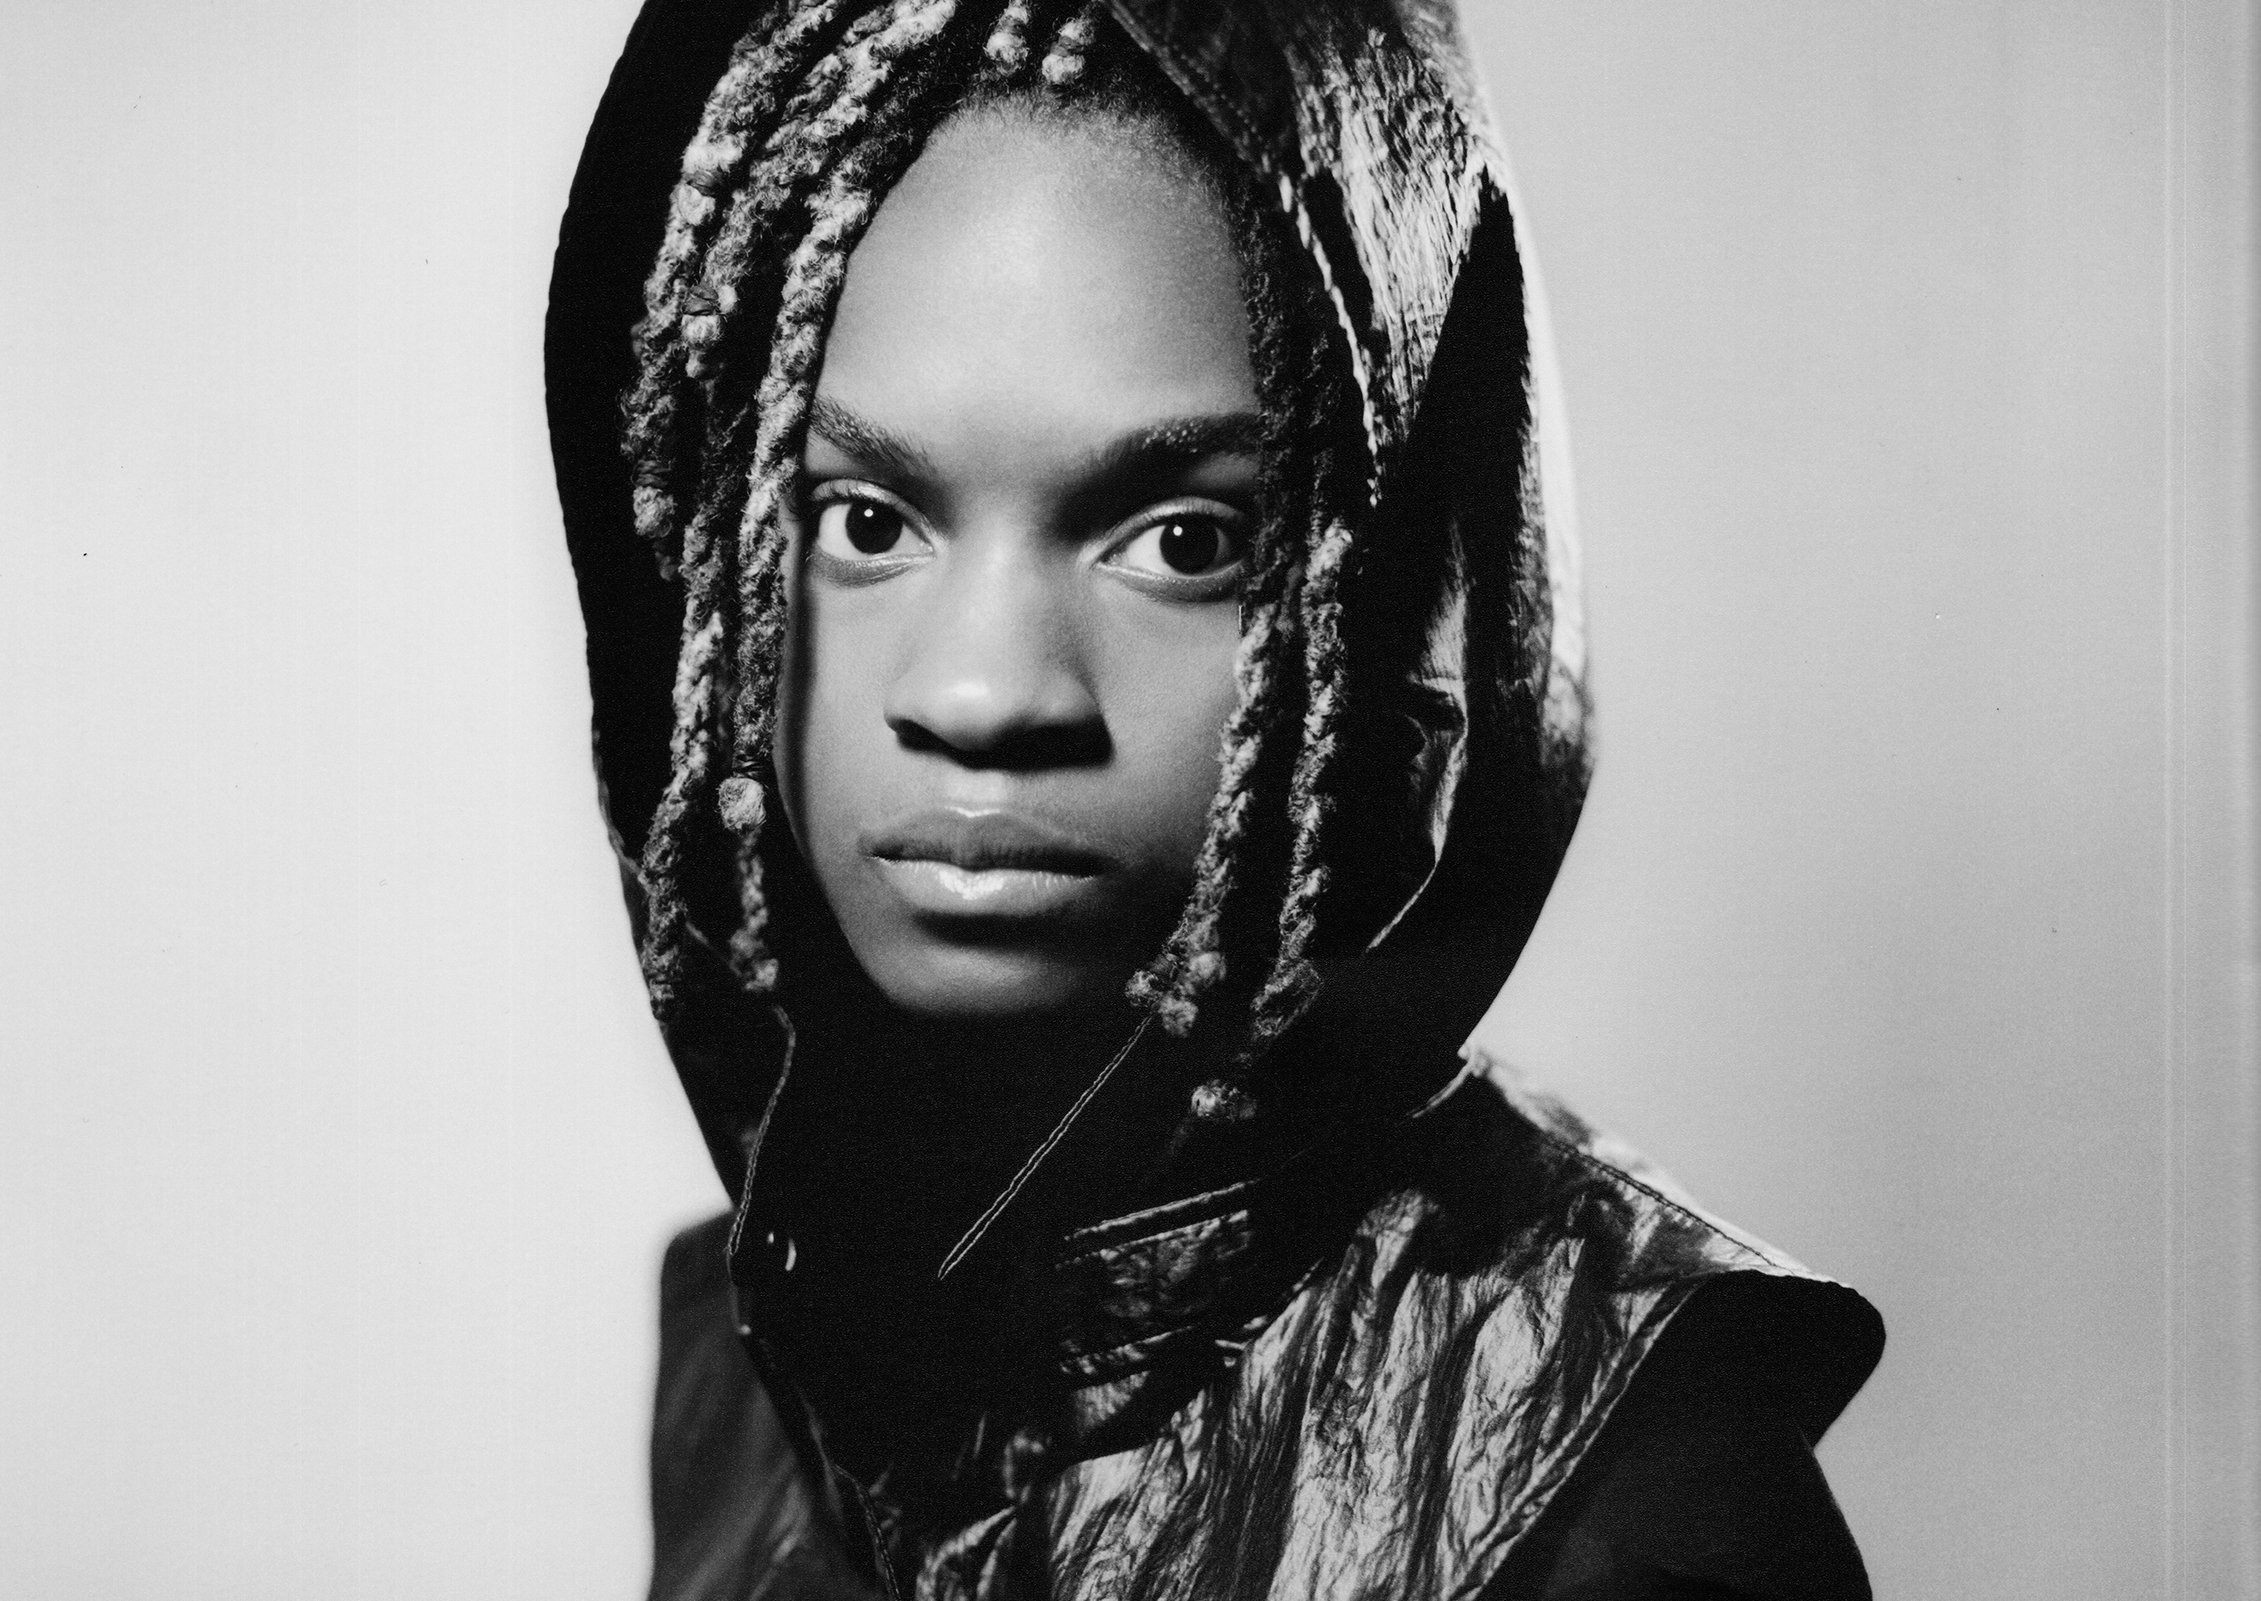 Koffee feature in Notion magazine, Notion 84 edition, Captivating interview, Insightful article, 2270x1610 HD Desktop